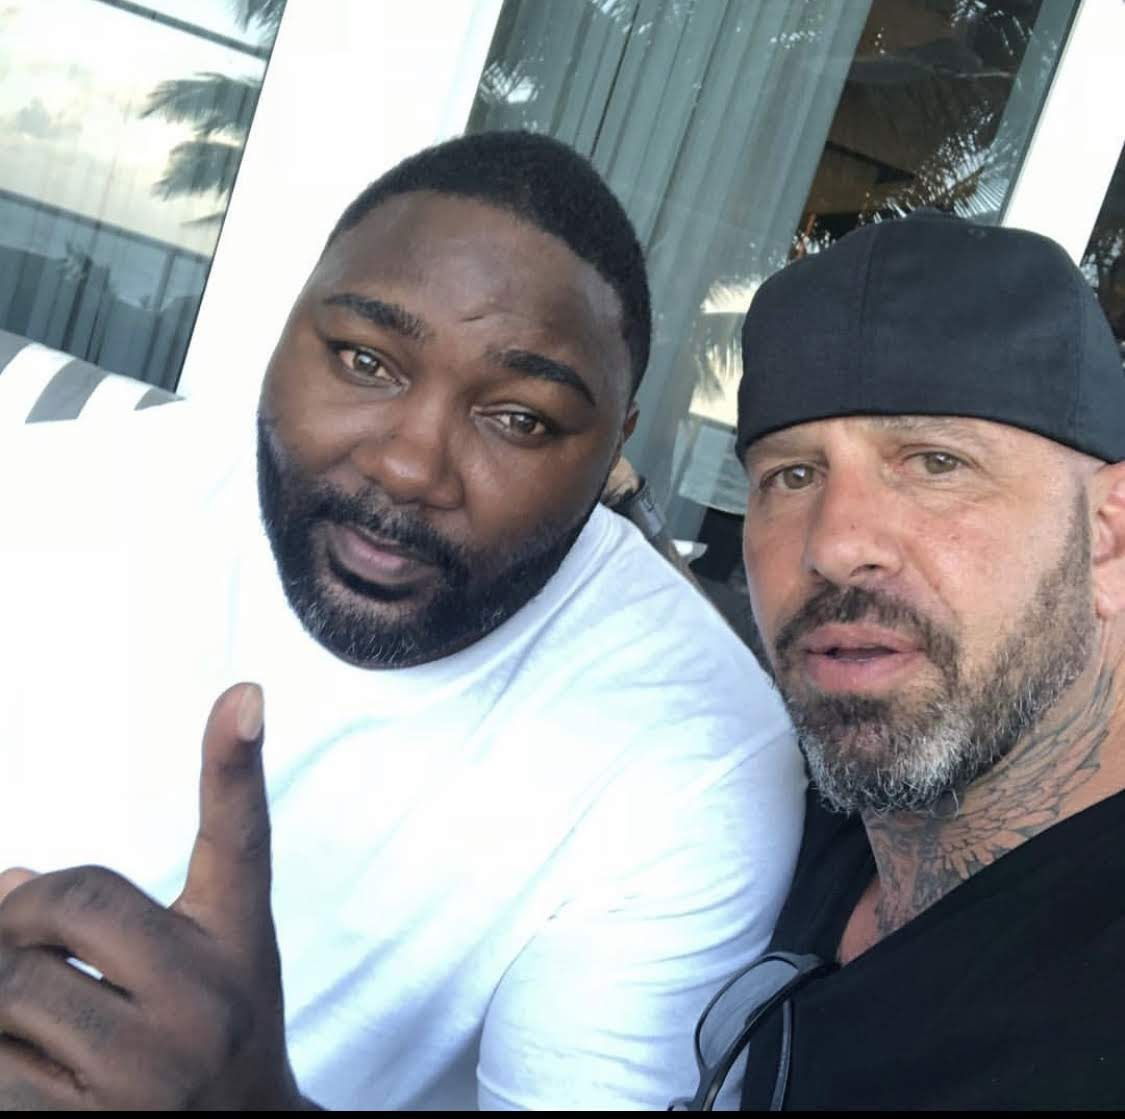 MMA Fighter Anthony Rumble Johnson and JT